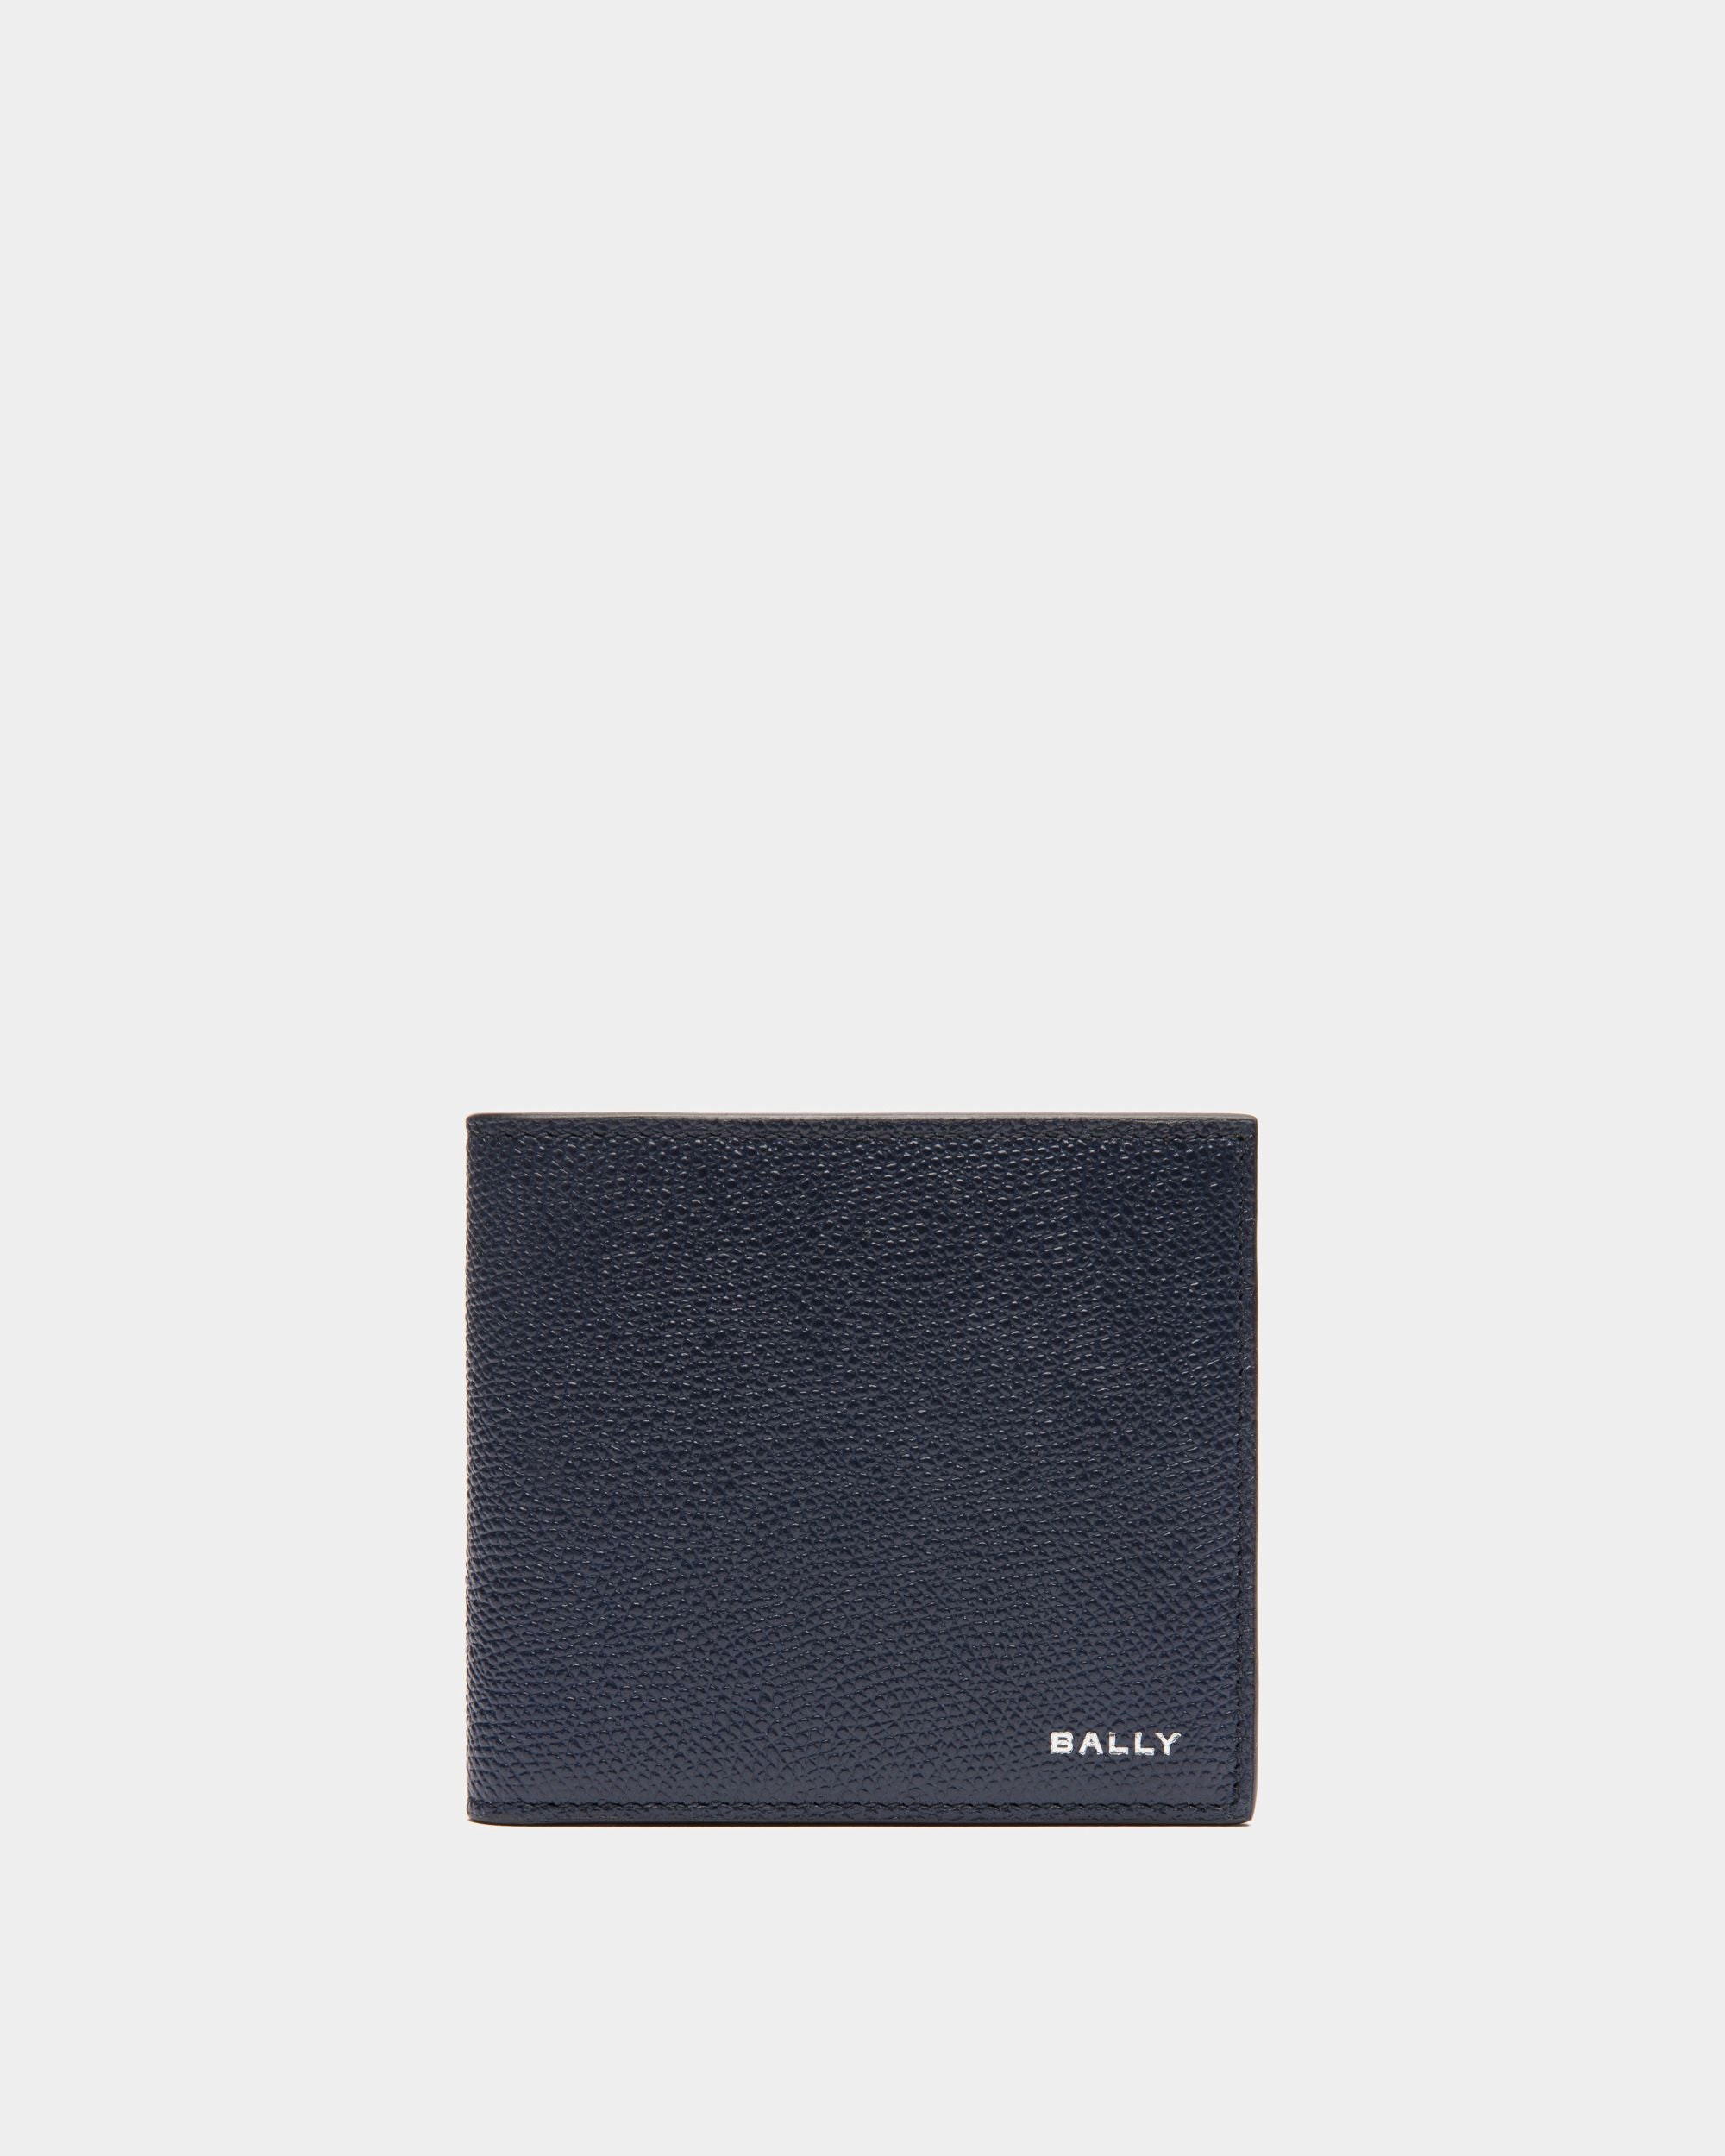 Flag | Men's Bifold Wallet in Blue Leather | Bally | Still Life Front